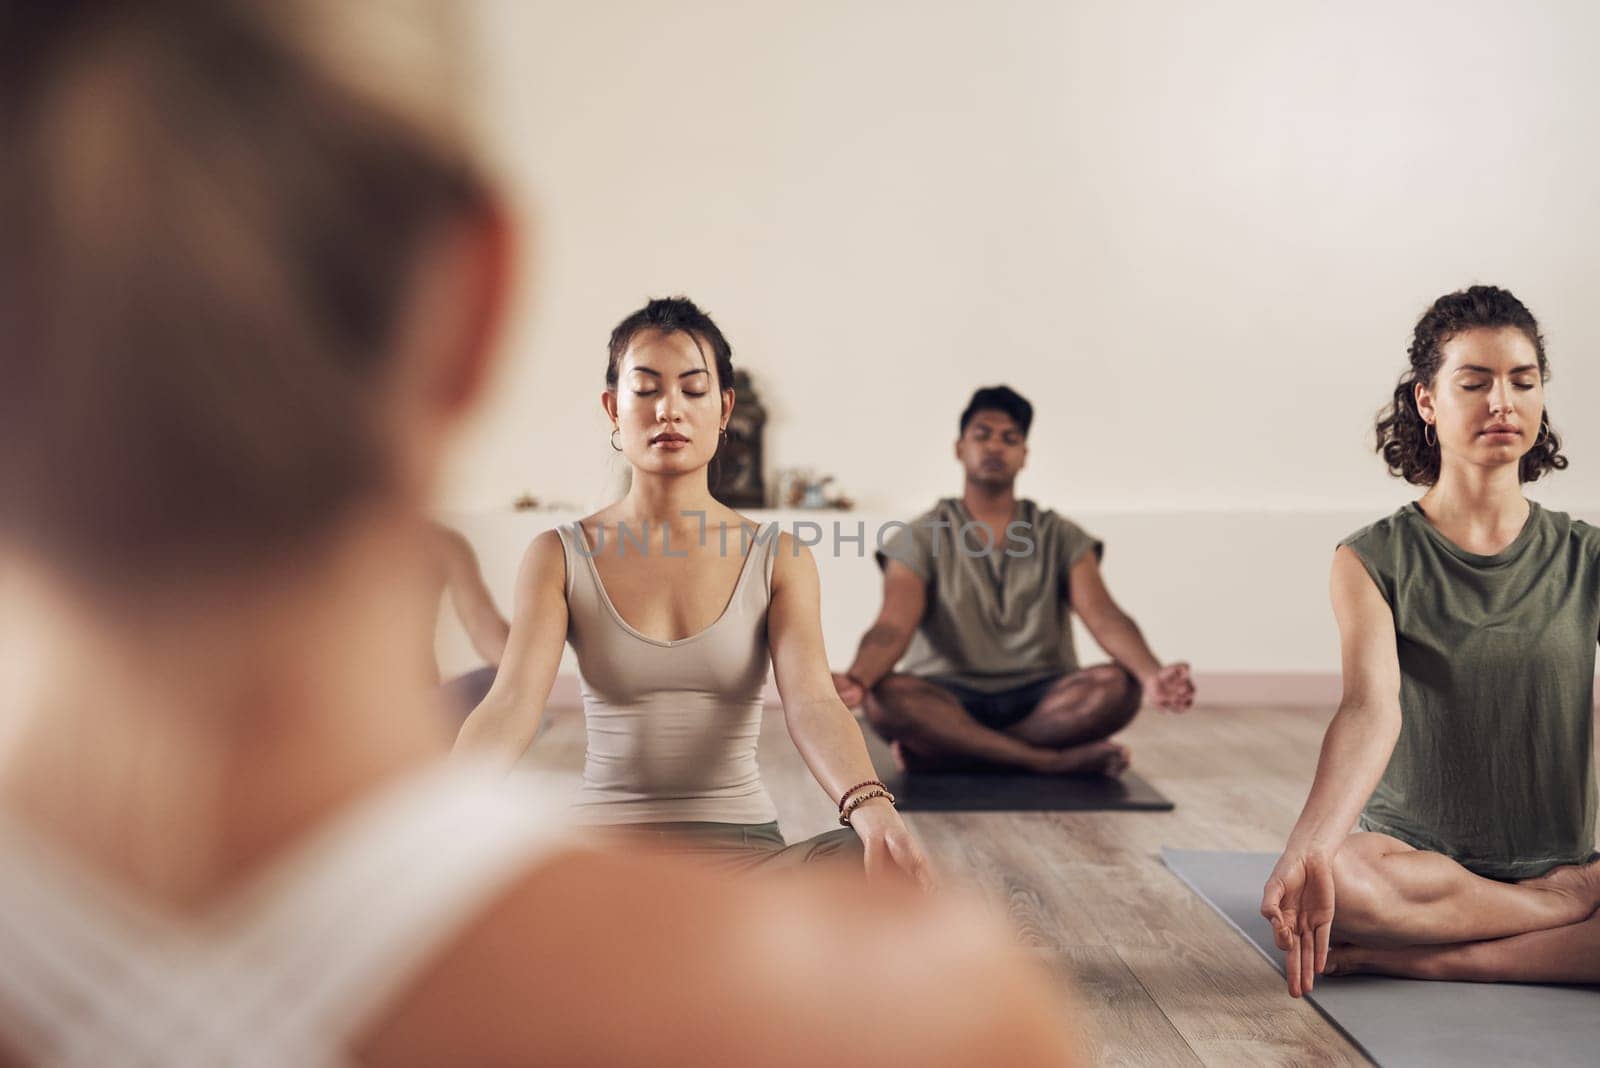 Yoga, meditation and group in a wellness and health class to relax with zen and peace. Female people, spiritual and holistic exercise with calm lotus pose with workout, fitness and body in a gym.